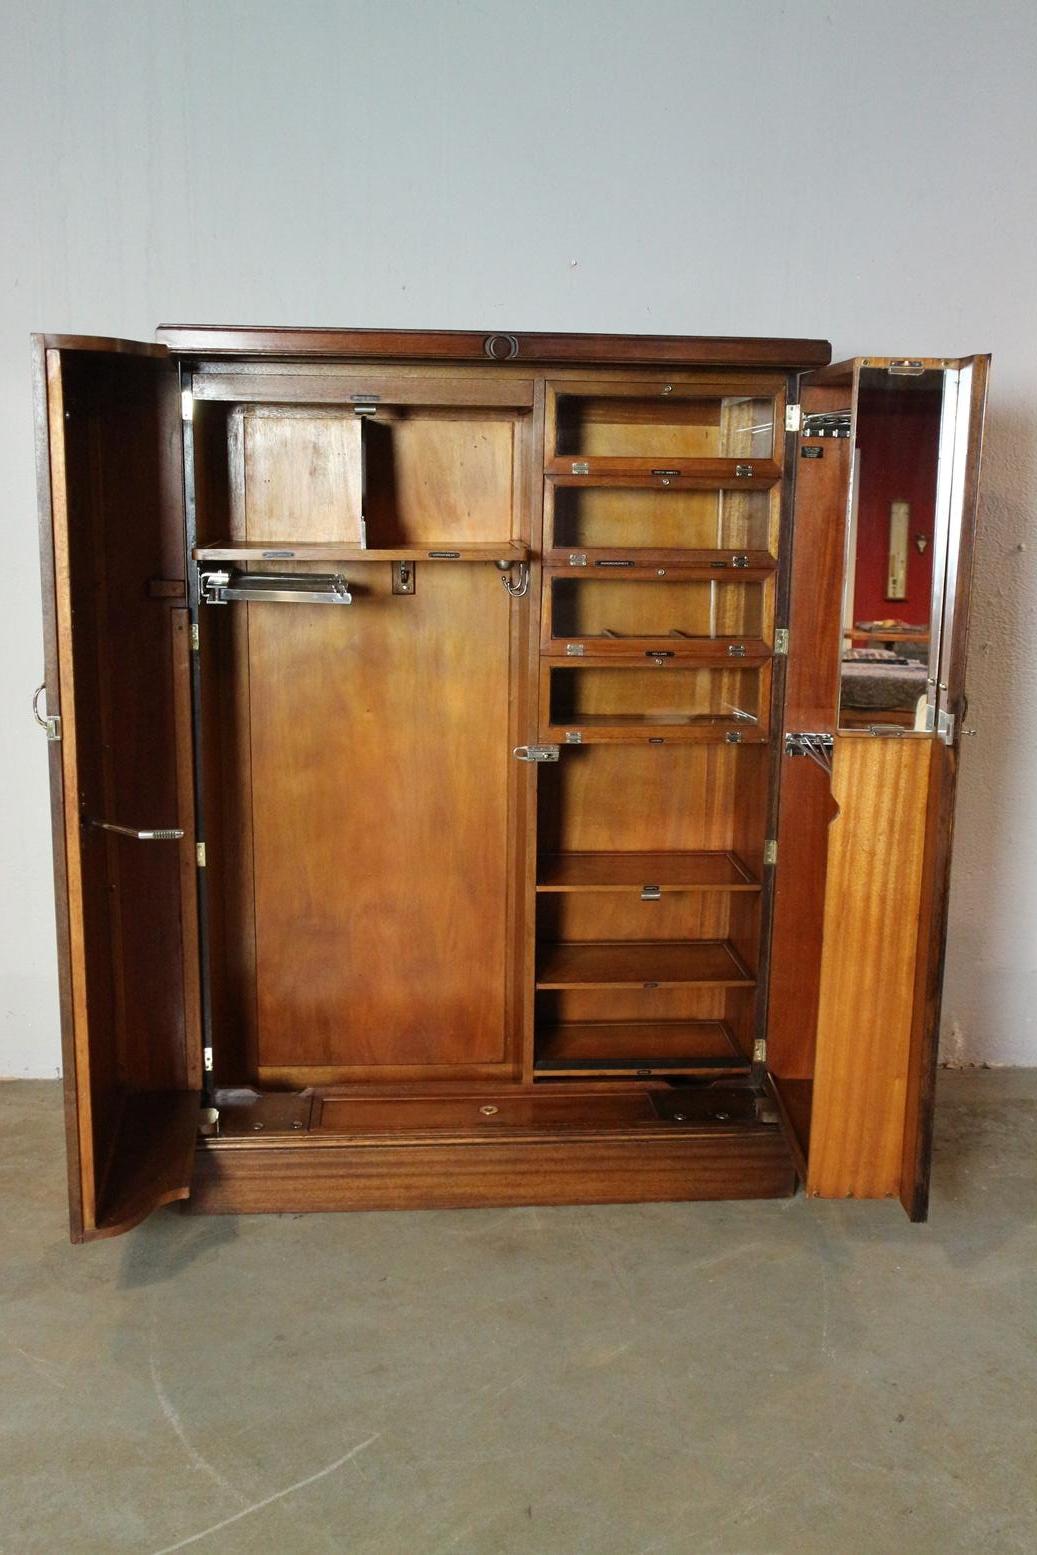 Beautiful antique mahogany Compactom wardrobe in perfect and completely original condition. Compactom wardrobe with the beautiful interior where there is a place for every item of clothing. Inside is equipped with compartments, shelves, hooks and